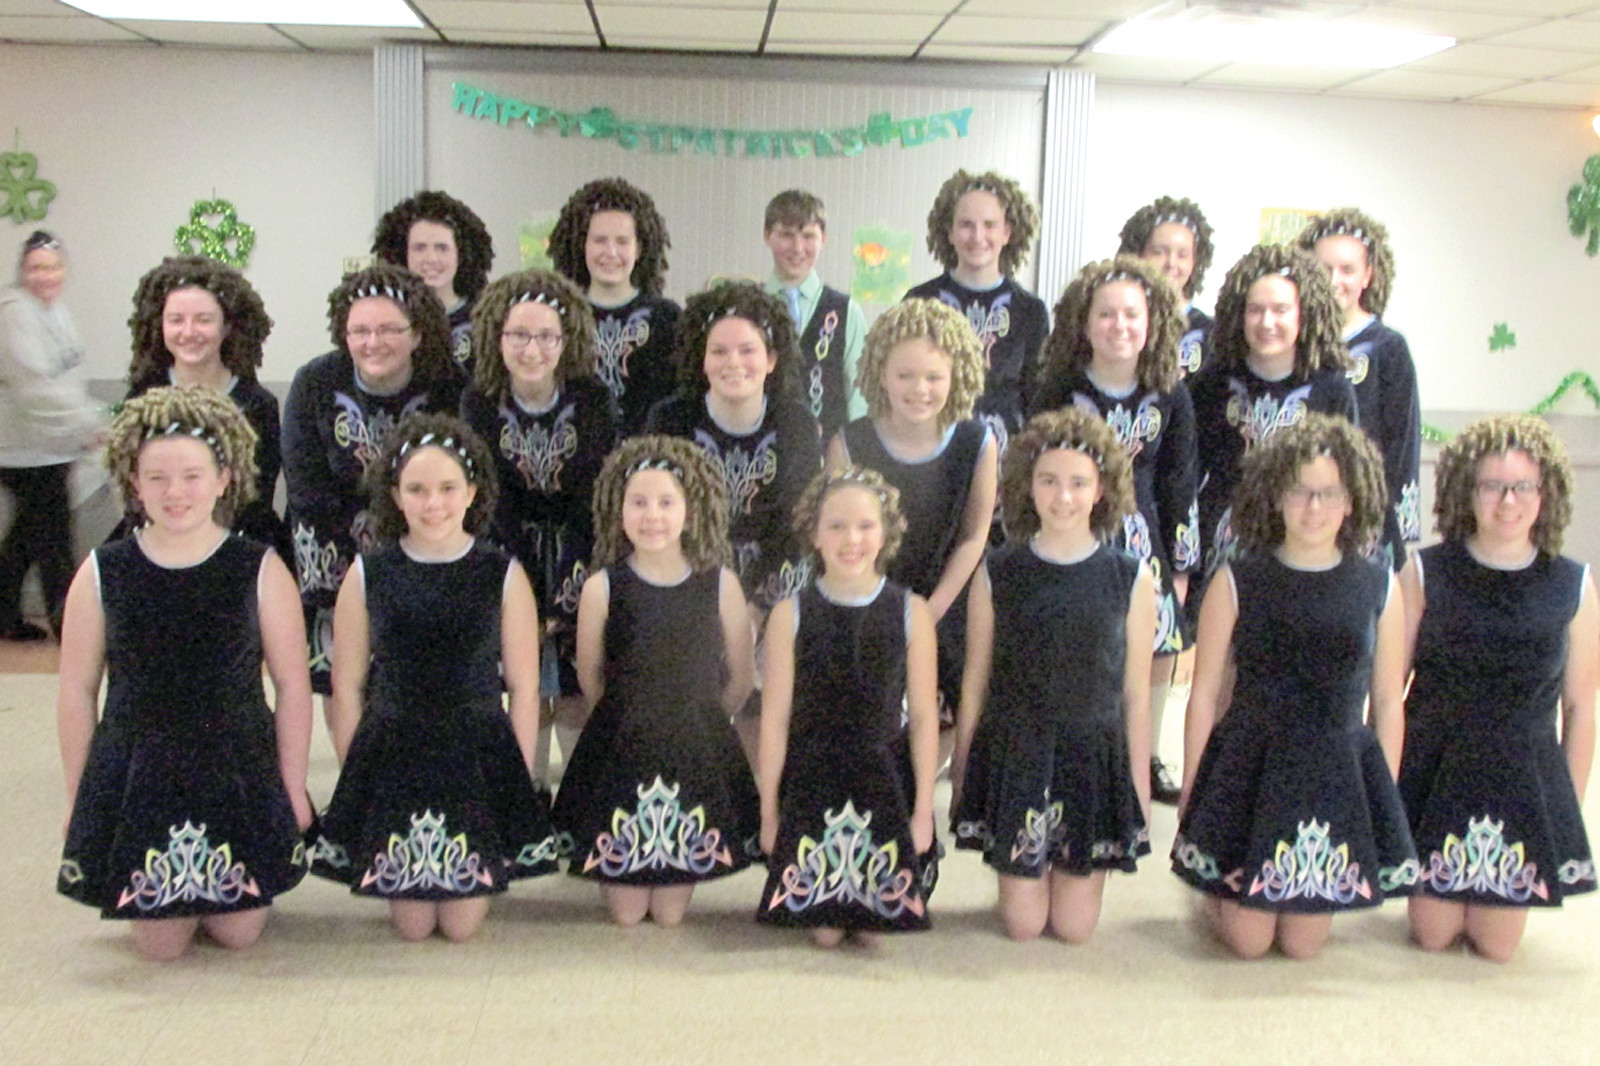 TALENTED TROUPE: Members of the Damhsa Irish Step Dance Studio who treated a nearly sold-out audience to a spectacular performance Saturday night at the Tri-City Elks are, in front from left: Gracie Lemieux, Alexandra Howlett, Olivia Weidele, Audrey Kuiawa, Joslyn Karpowich, Athena Howlett and Pepper Travers; middle: Mackenzee Stanley, Olivia Doyle, Isabelle White, Joseph Weidele, Kiley Lemieux, Fiona Atoyan and Mollee Daniels; top: Cailee Lavoie, Devin Corbin, Grace Pine, Annaliese Brannon, Sarah Corbin, Tessa Foley and Abigail Steinhilber.